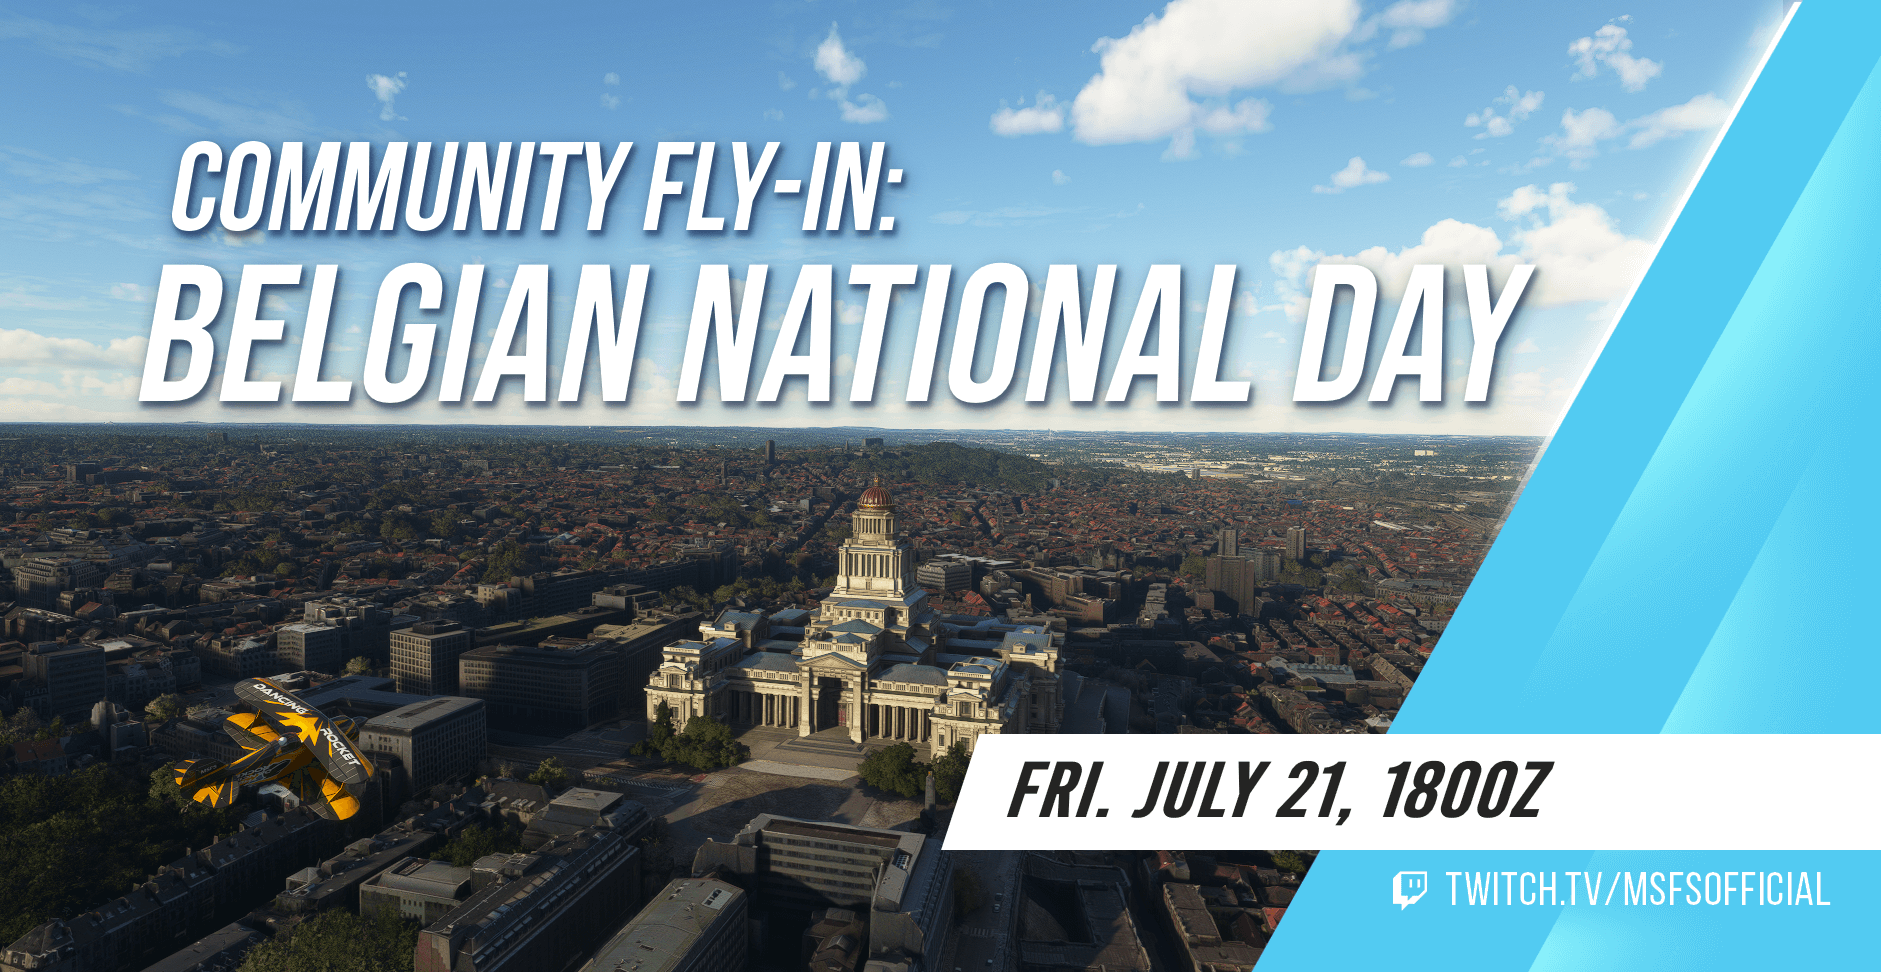 Community Fly-In: Belgian National Day. Join us on Friday July 21 at 1800Z! You can watch at twitch.tv/msfsofficial